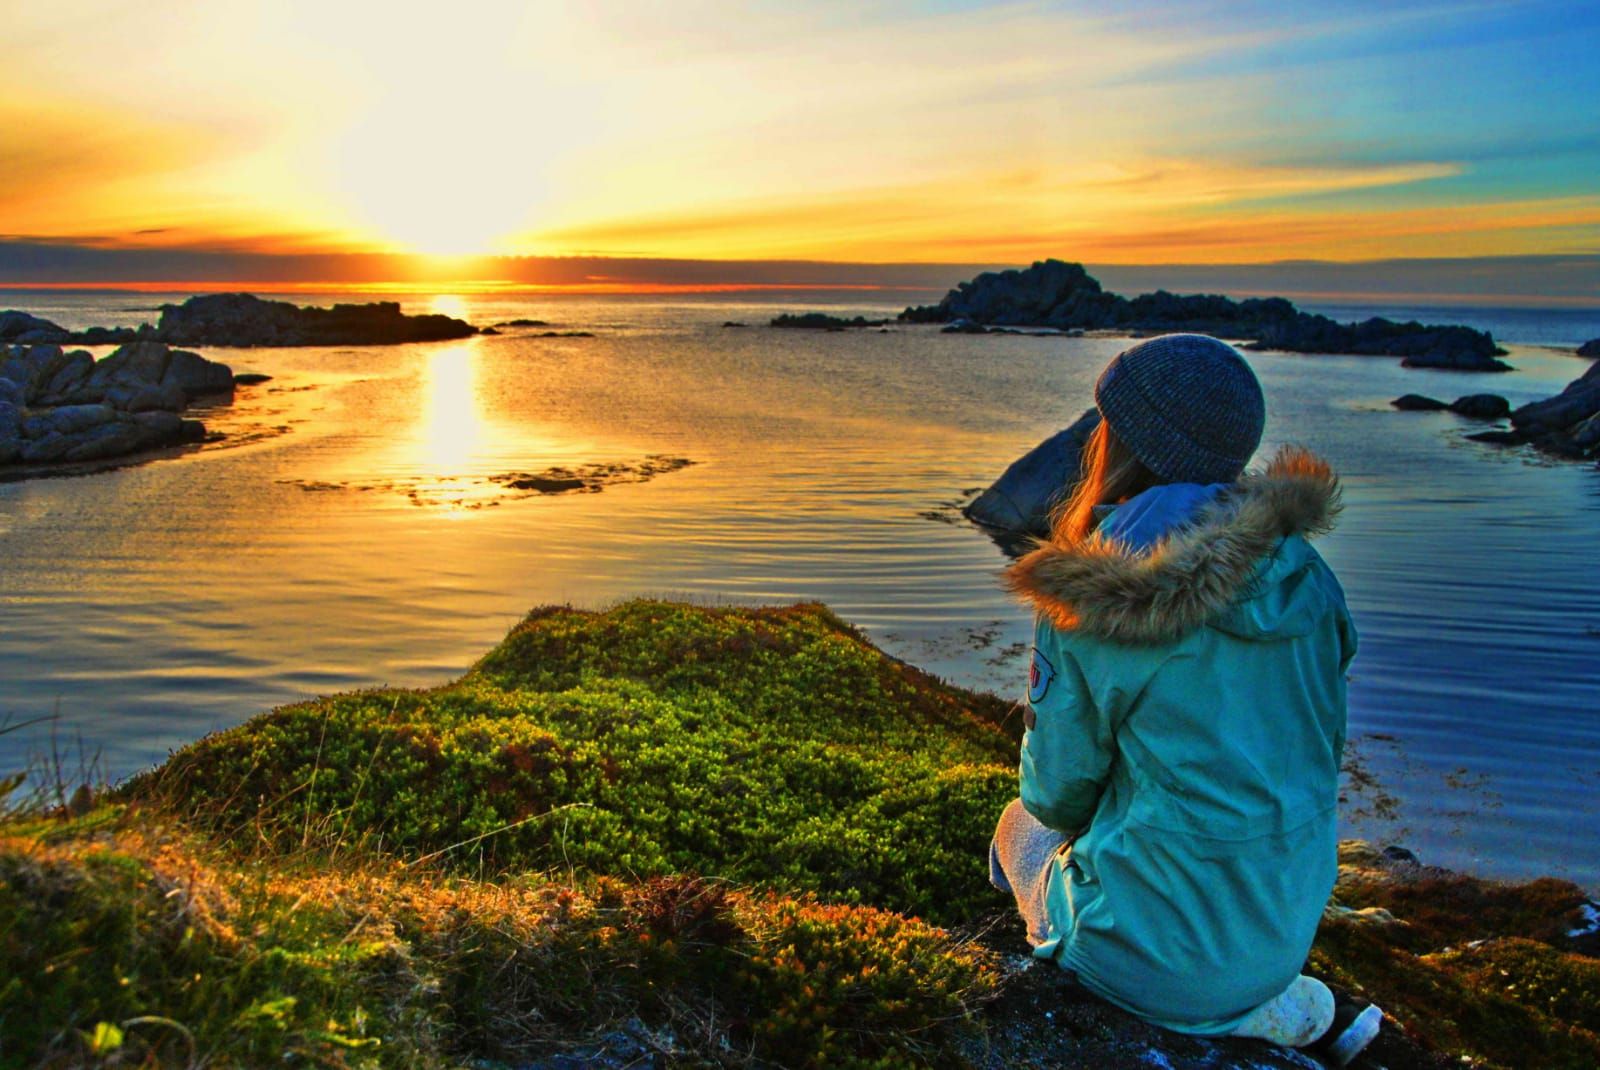 A woman watches the sun set in the Lofoten Islands, Norway. Photo: Northern Explorer.